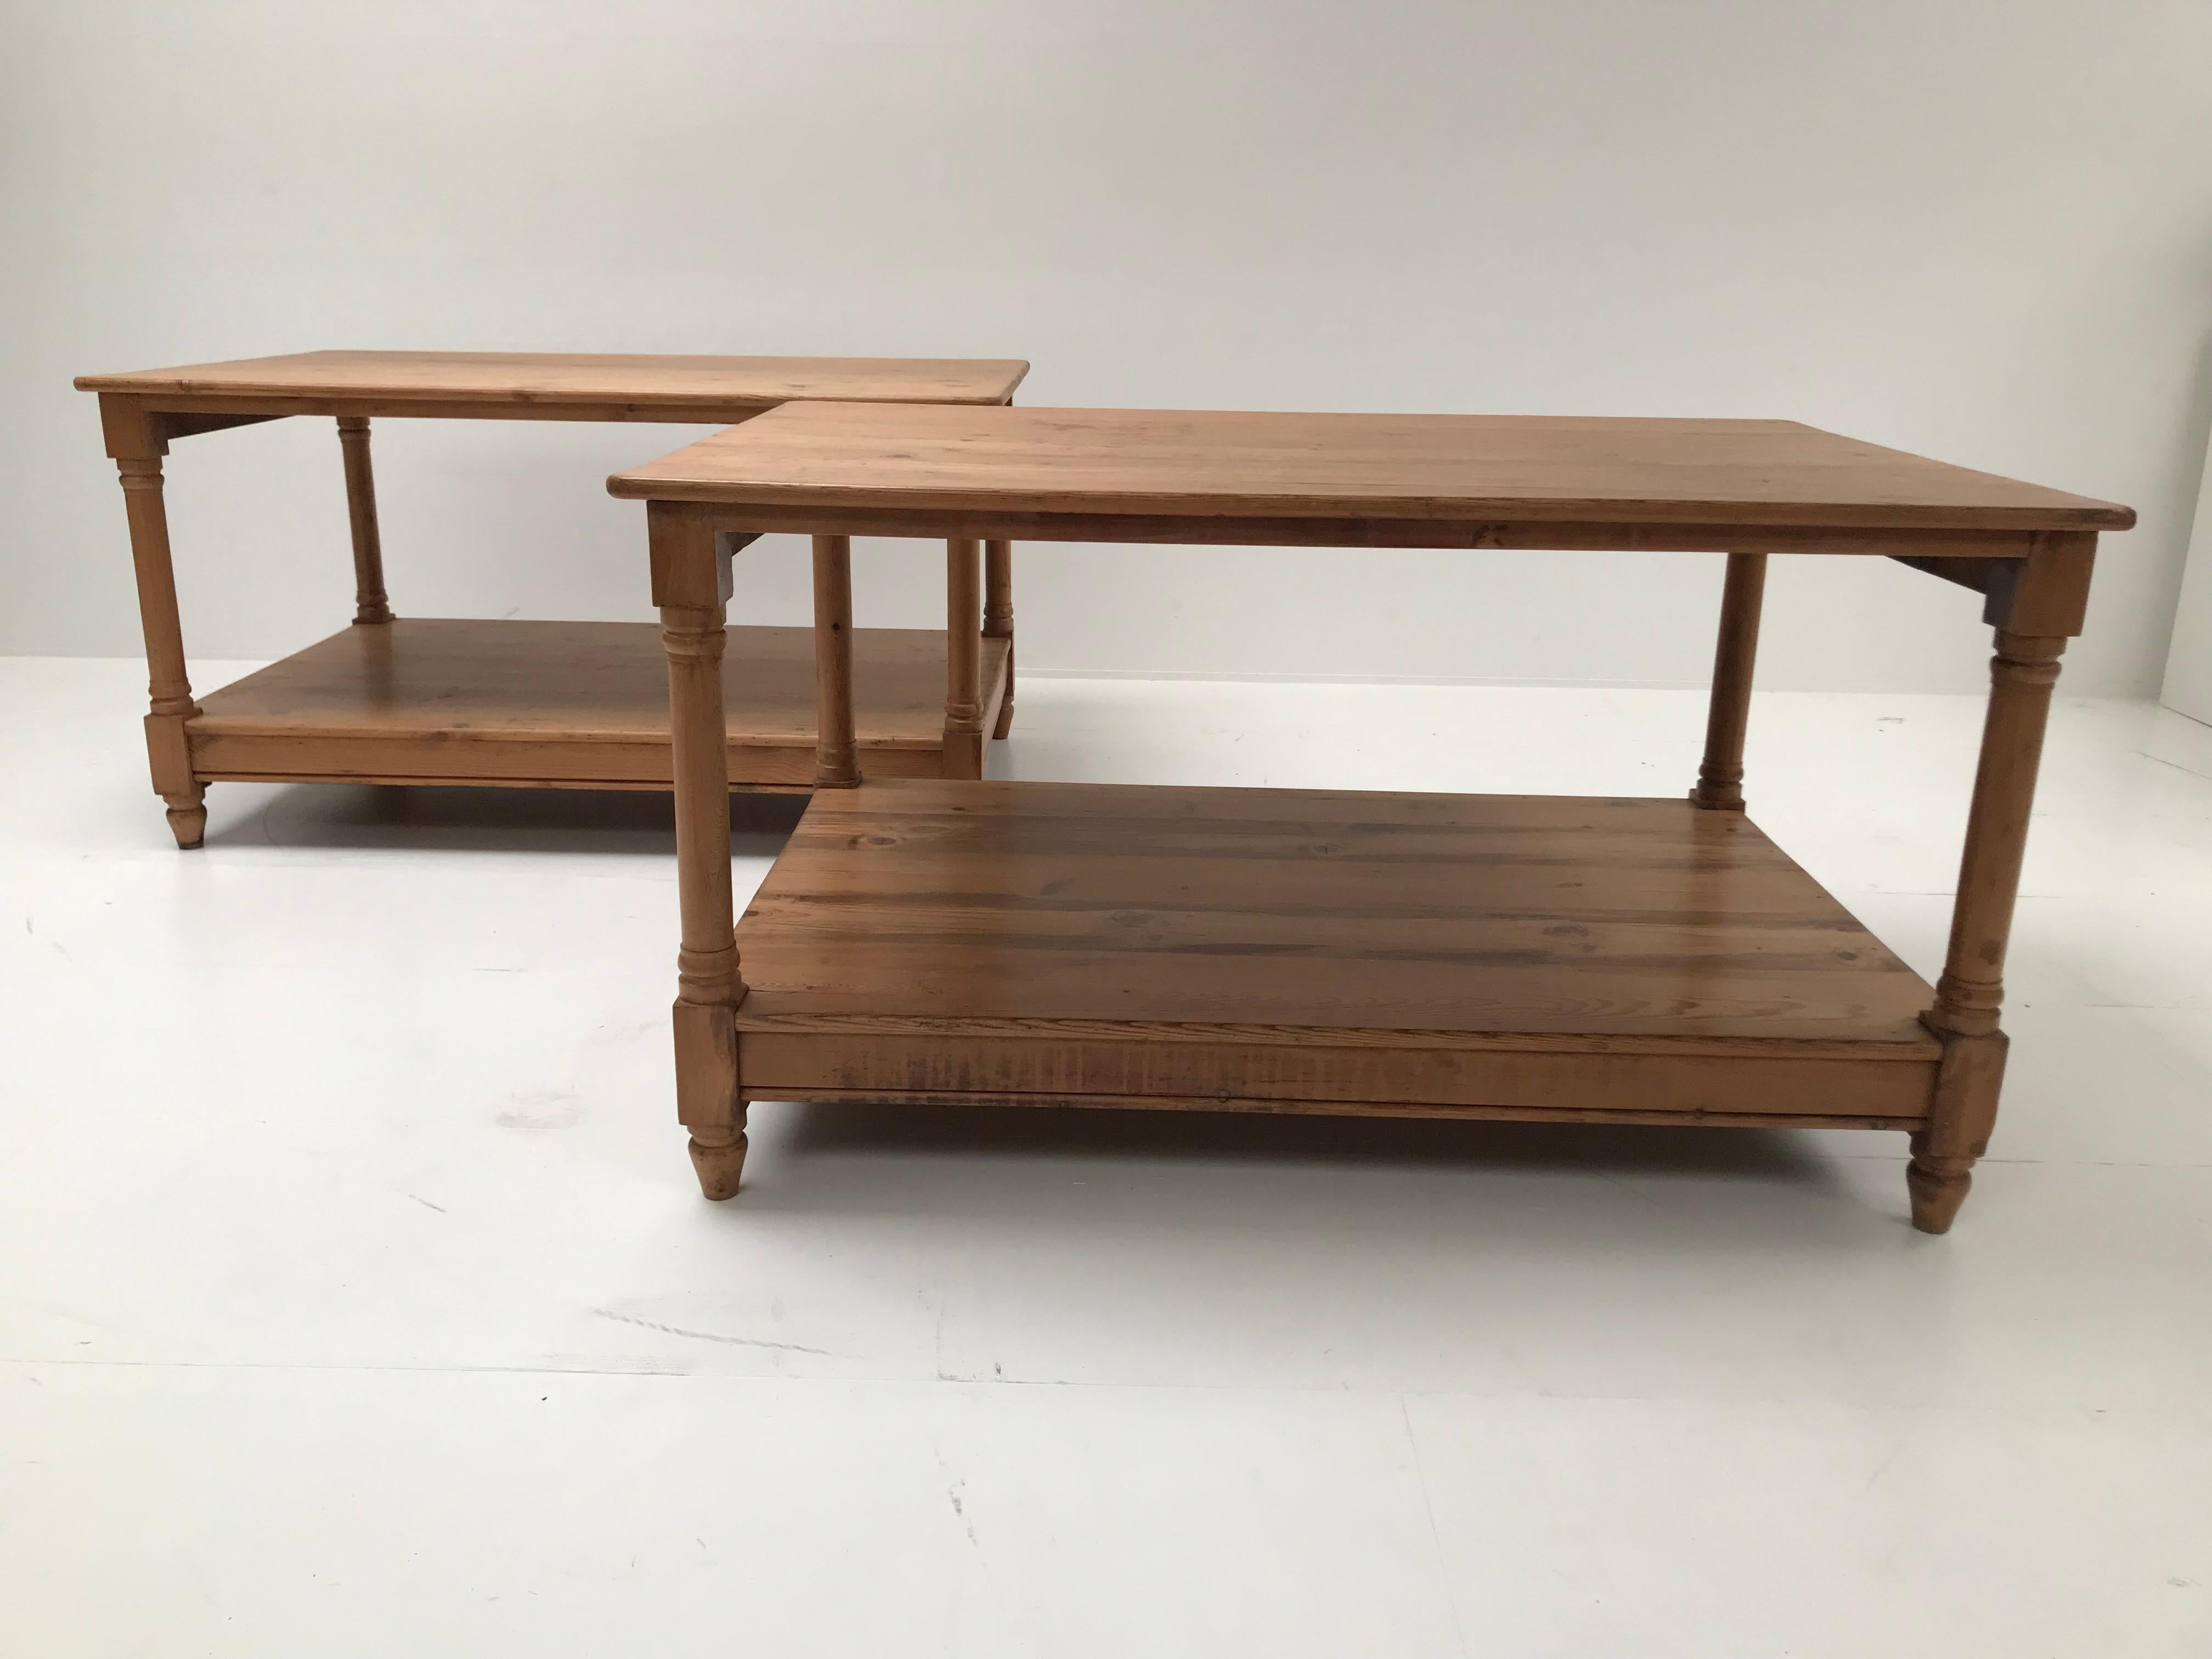 Elegant small pair of French Drapiers Tables,

in a bleached Pine wood with a great shine and patina of the wood,

from the South of France from around 1920,

can be used for different purposes, very decorative pair of tables.